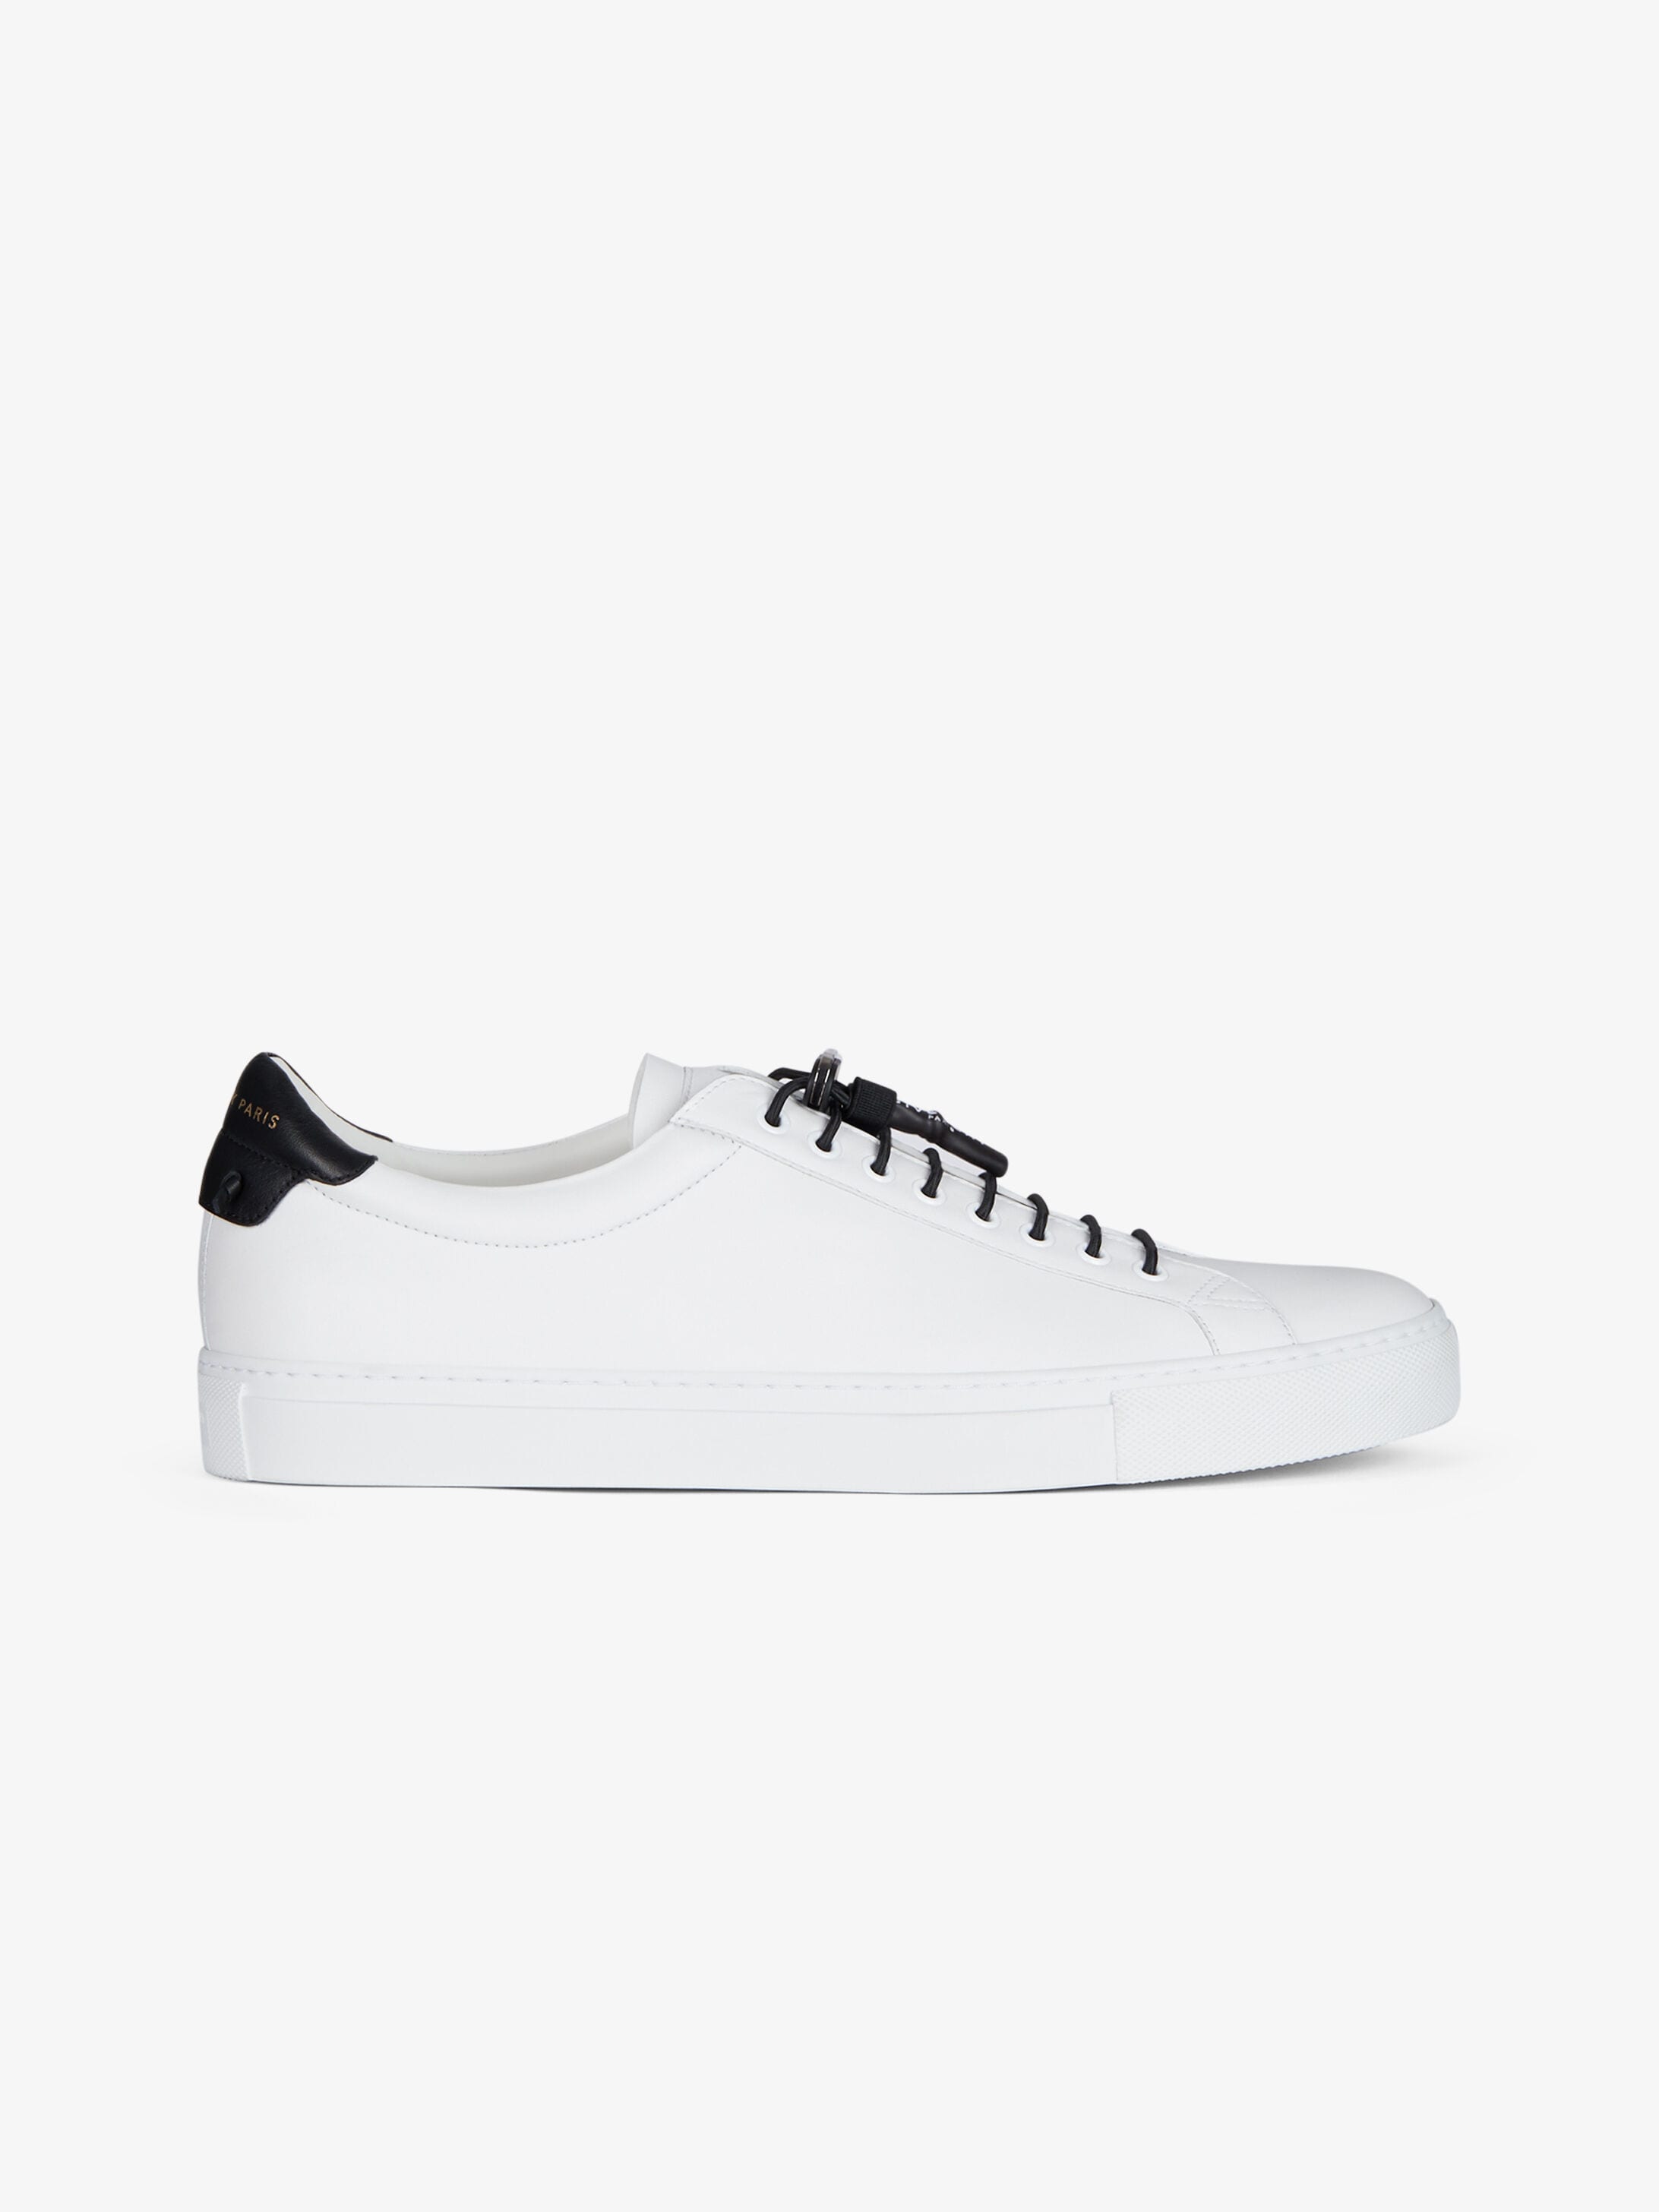 givenchy shoes men